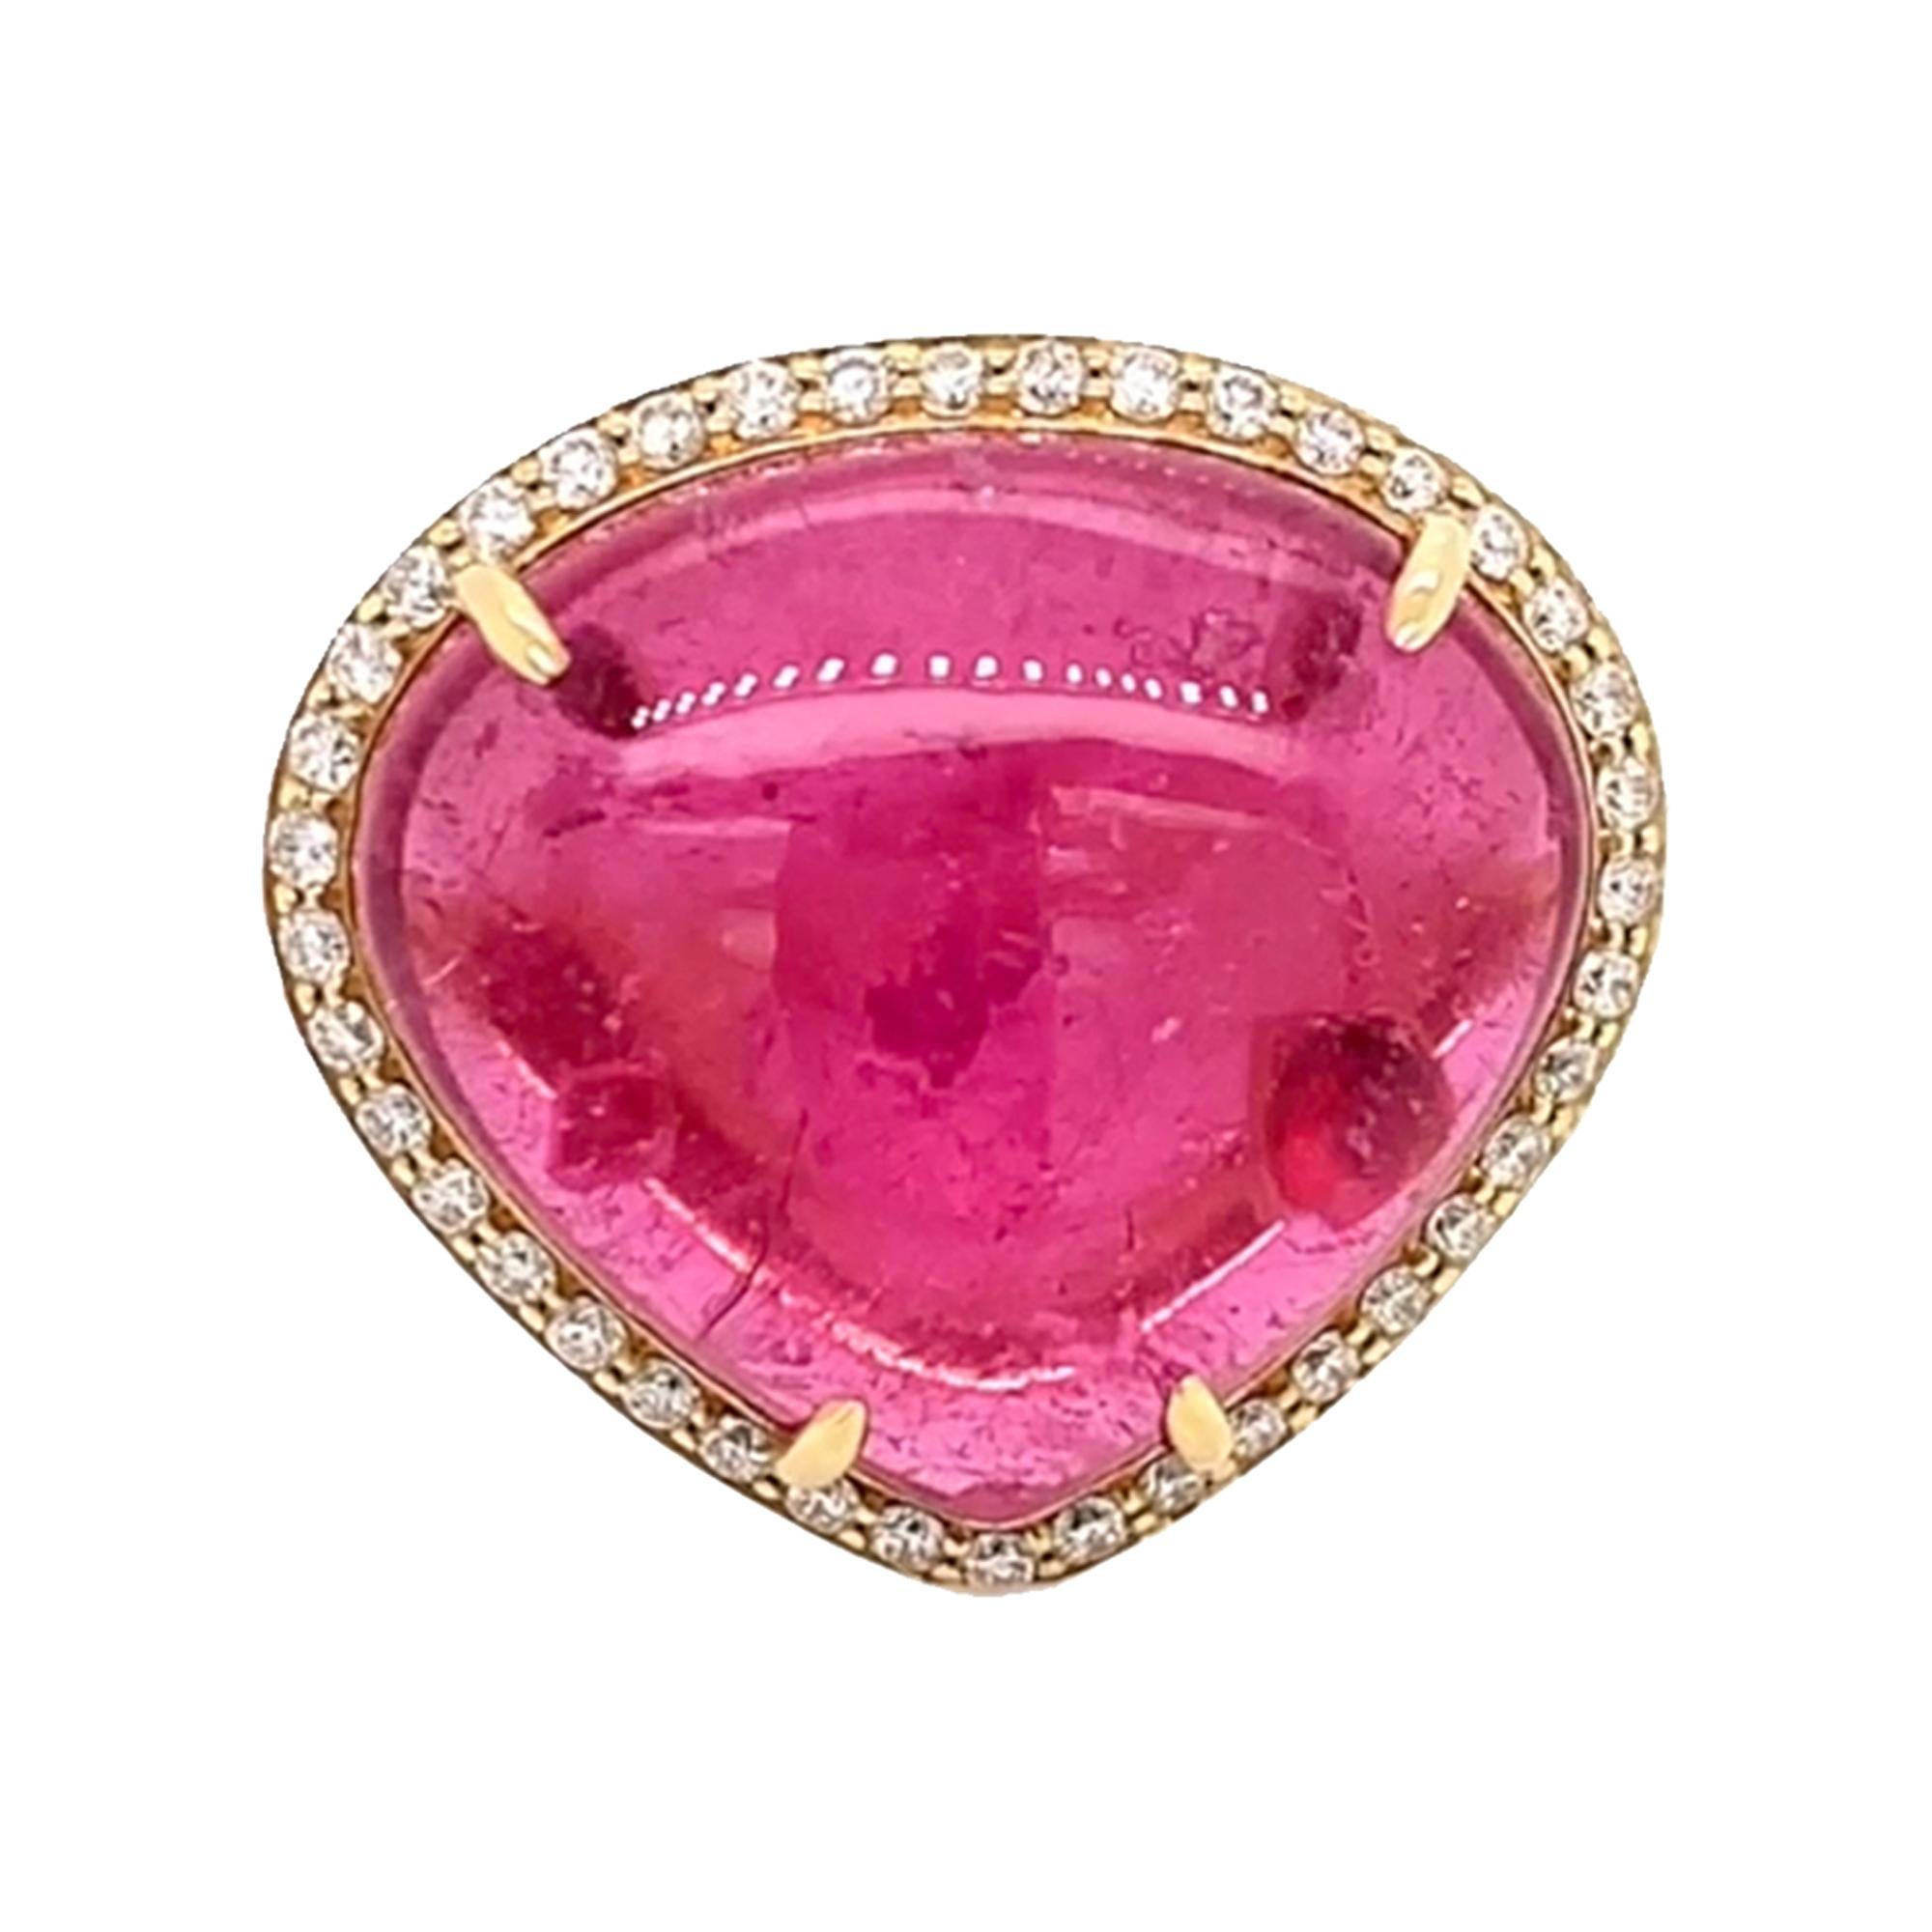 Pink Tourmaline Heart Ring with Diamonds in 18K Yellow Gold, from 'G-One' Collection

Gemstone Approx Wt: 26.89 Carats

Diamonds: G-H / VS; Approx. Wt.: 0.47 Carats